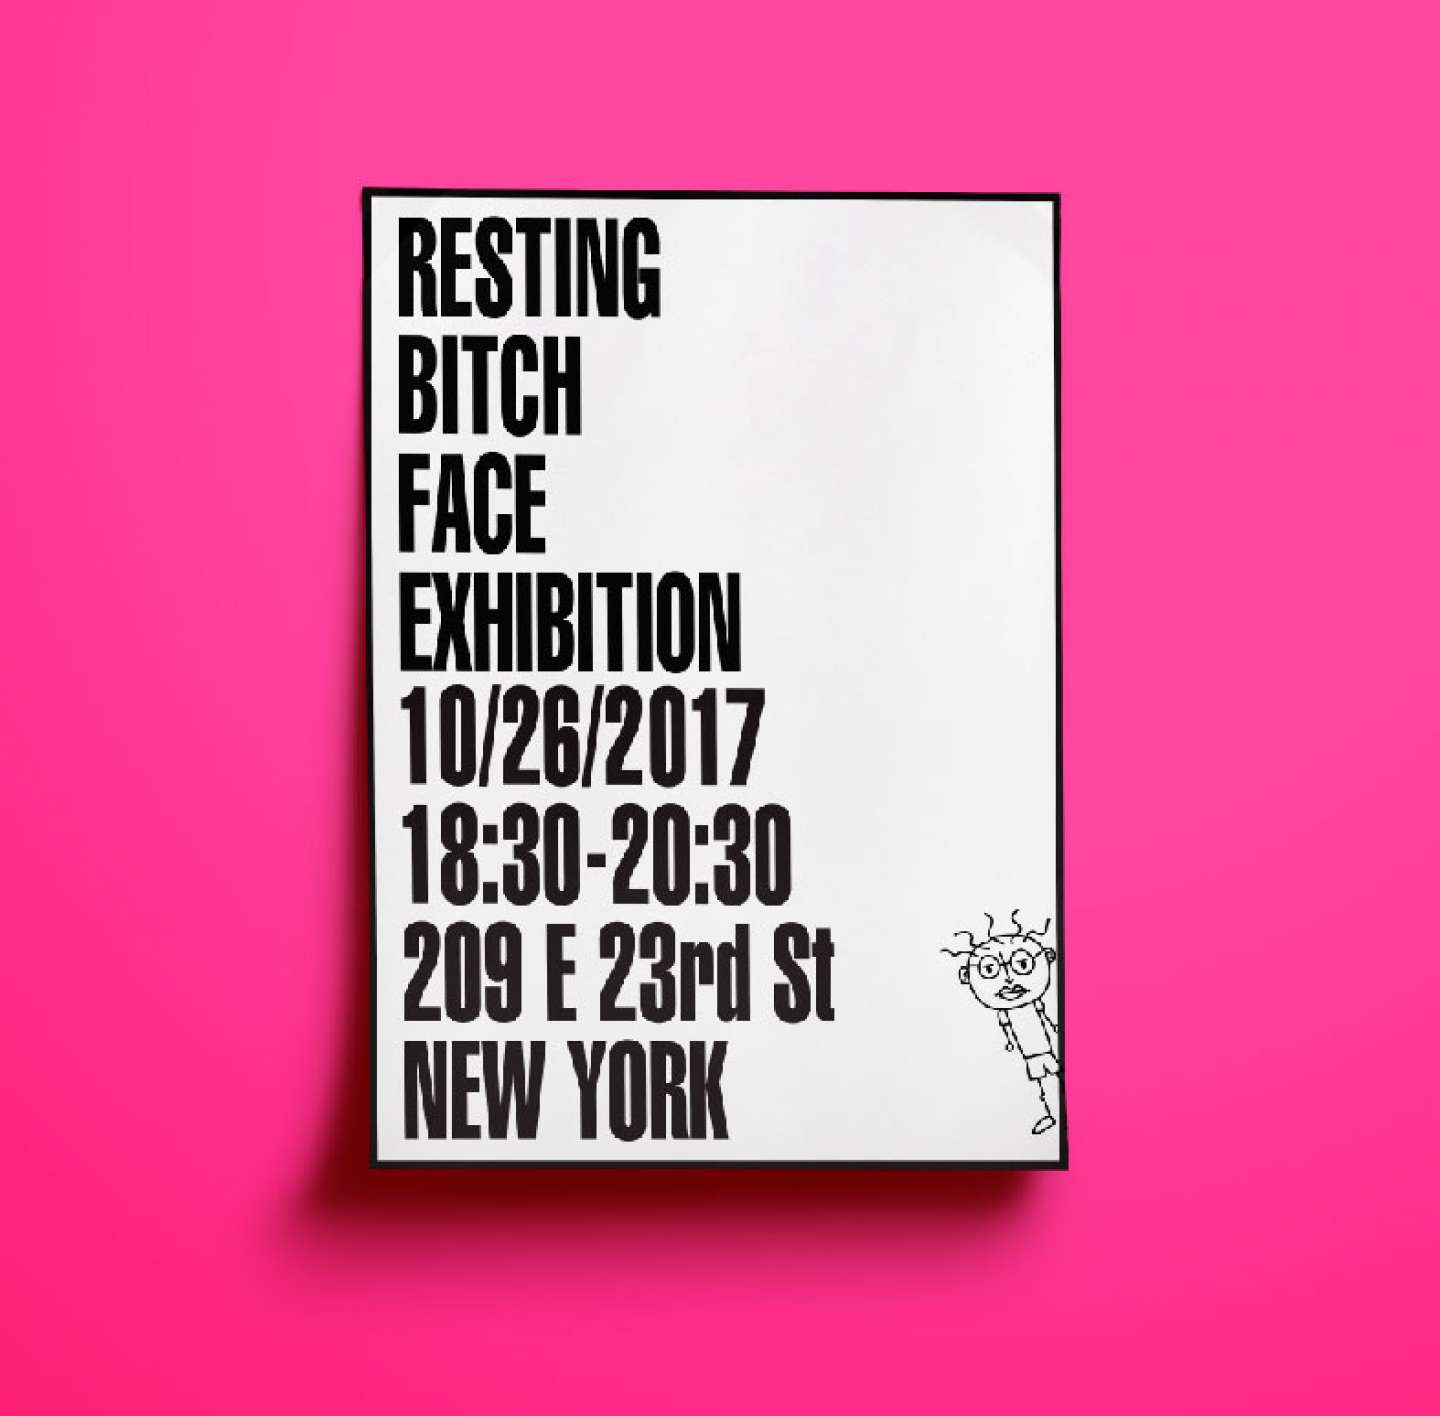 Resting Bitch Face Exhibition